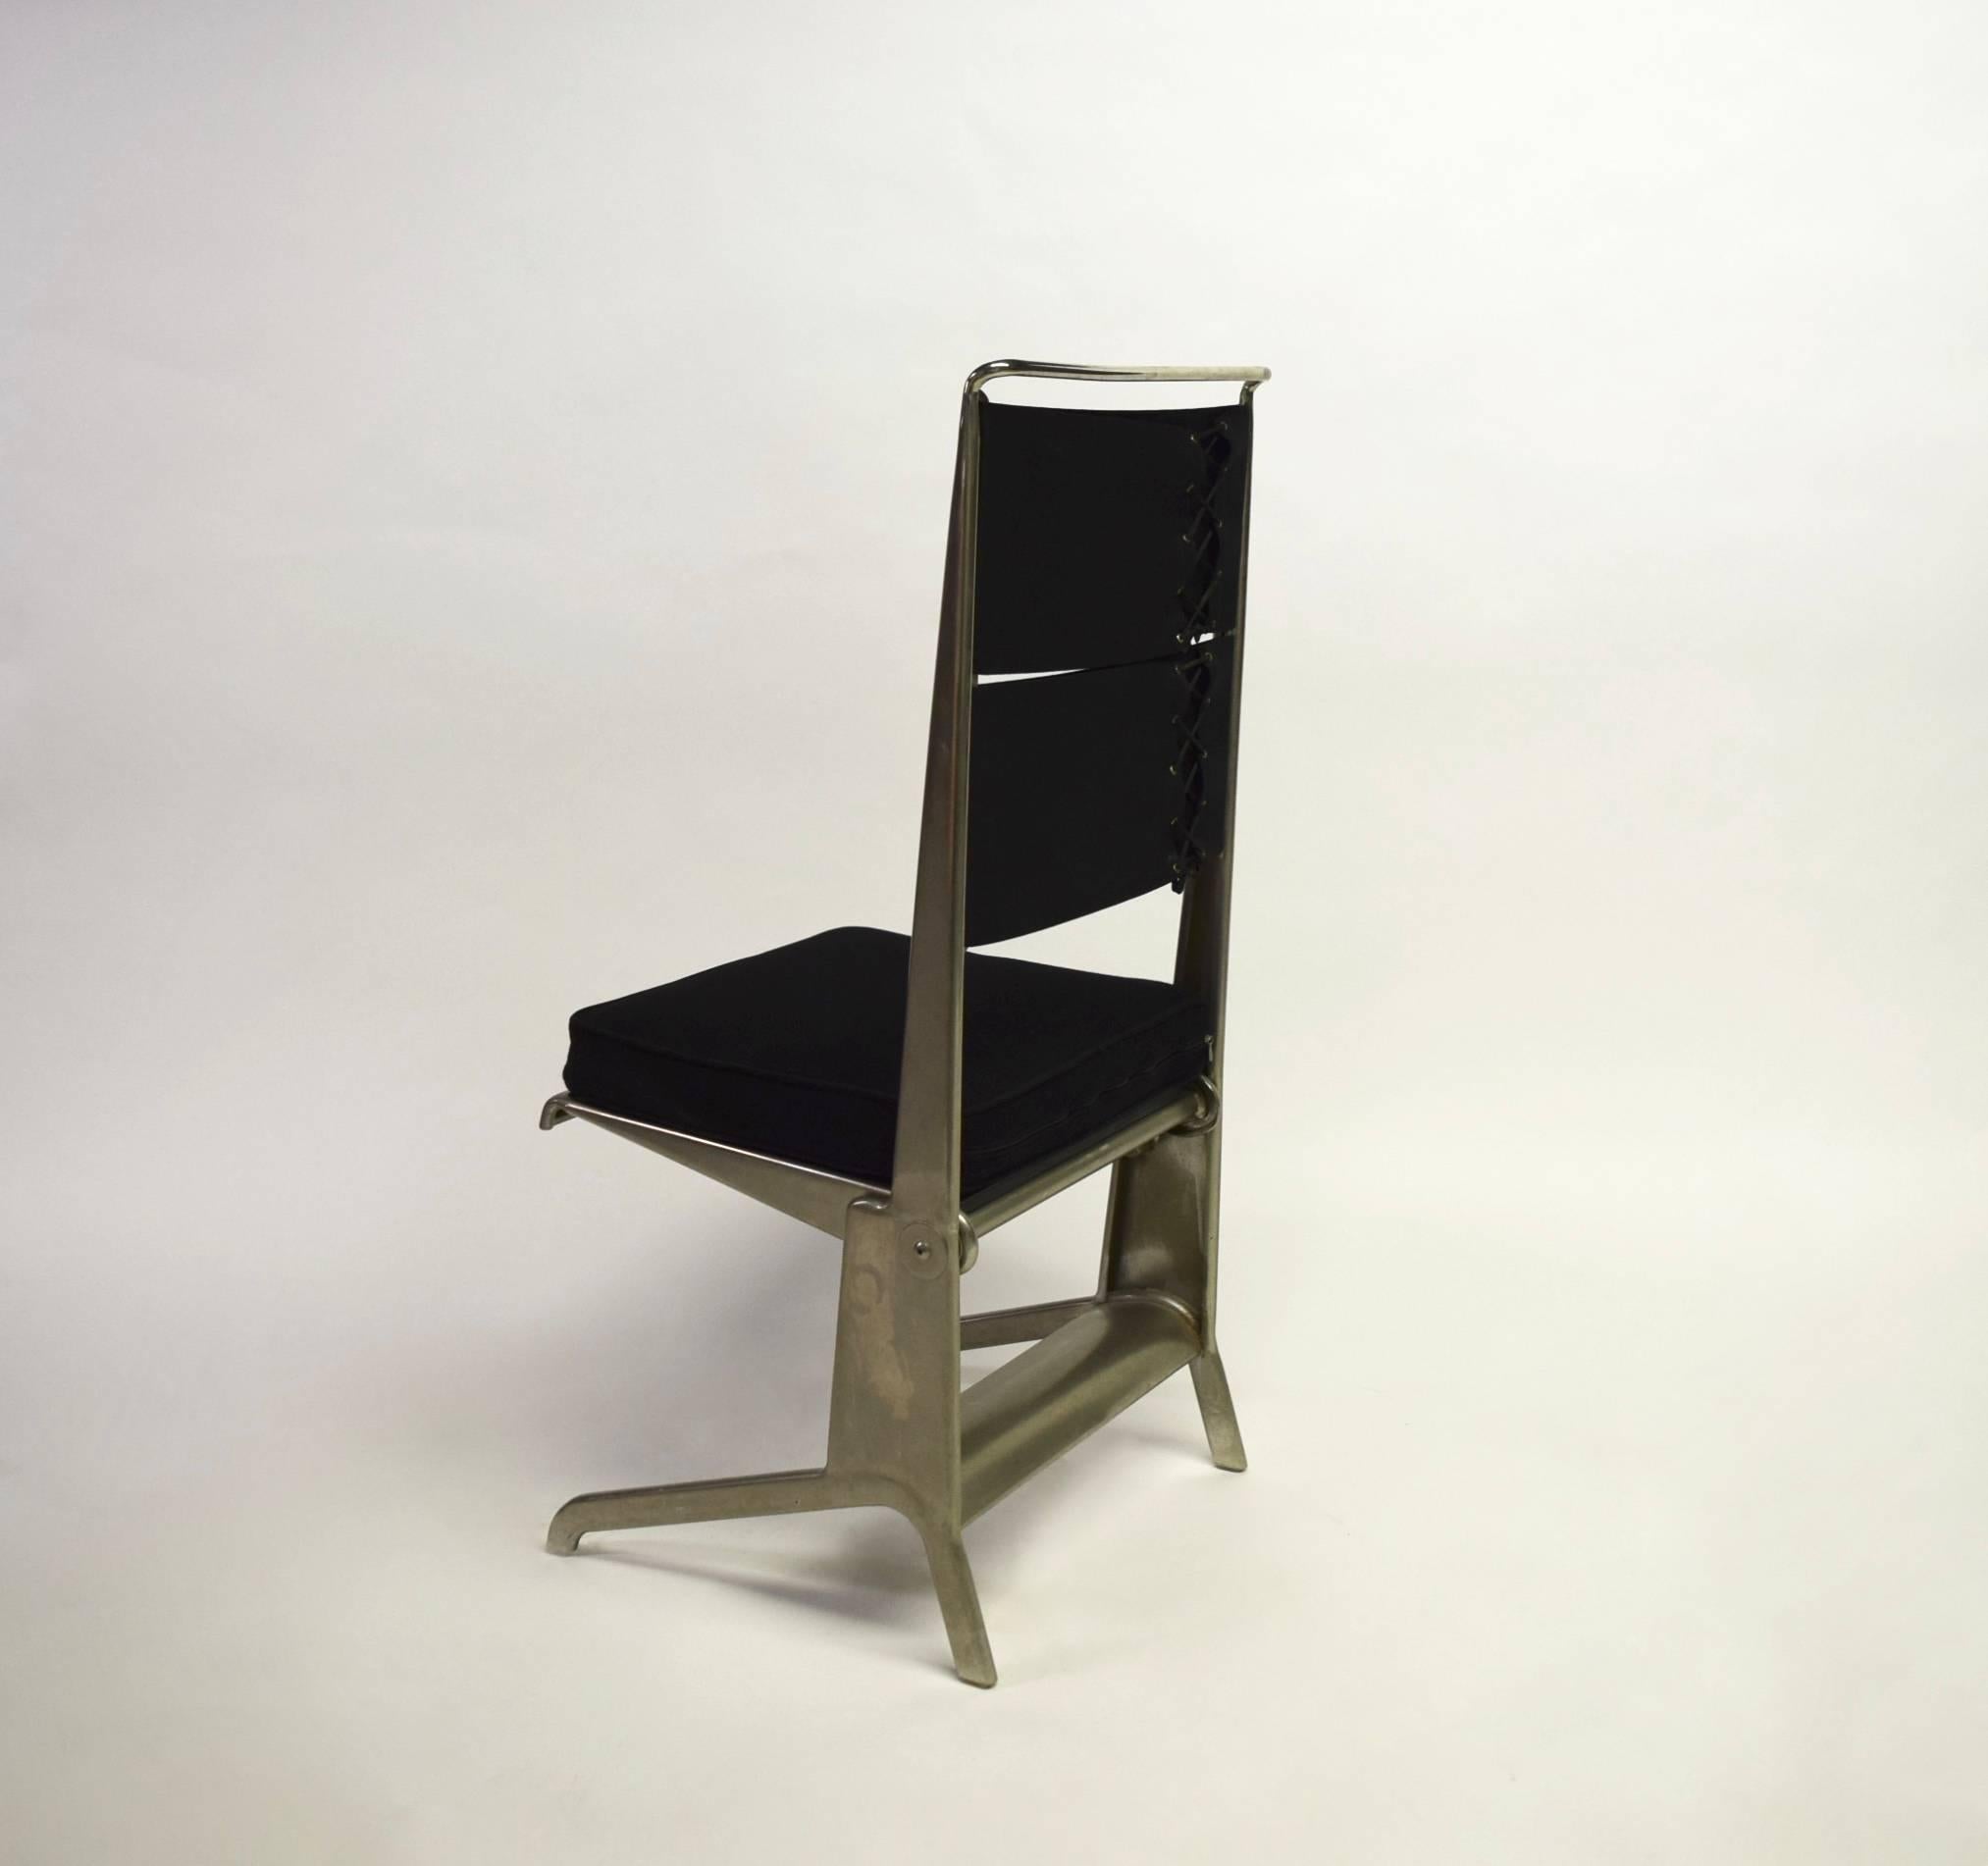 Mid-Century Modern Pair of Jean Prouvé Folding Chairs Designed 1930, Manufactured by Tecta 1983